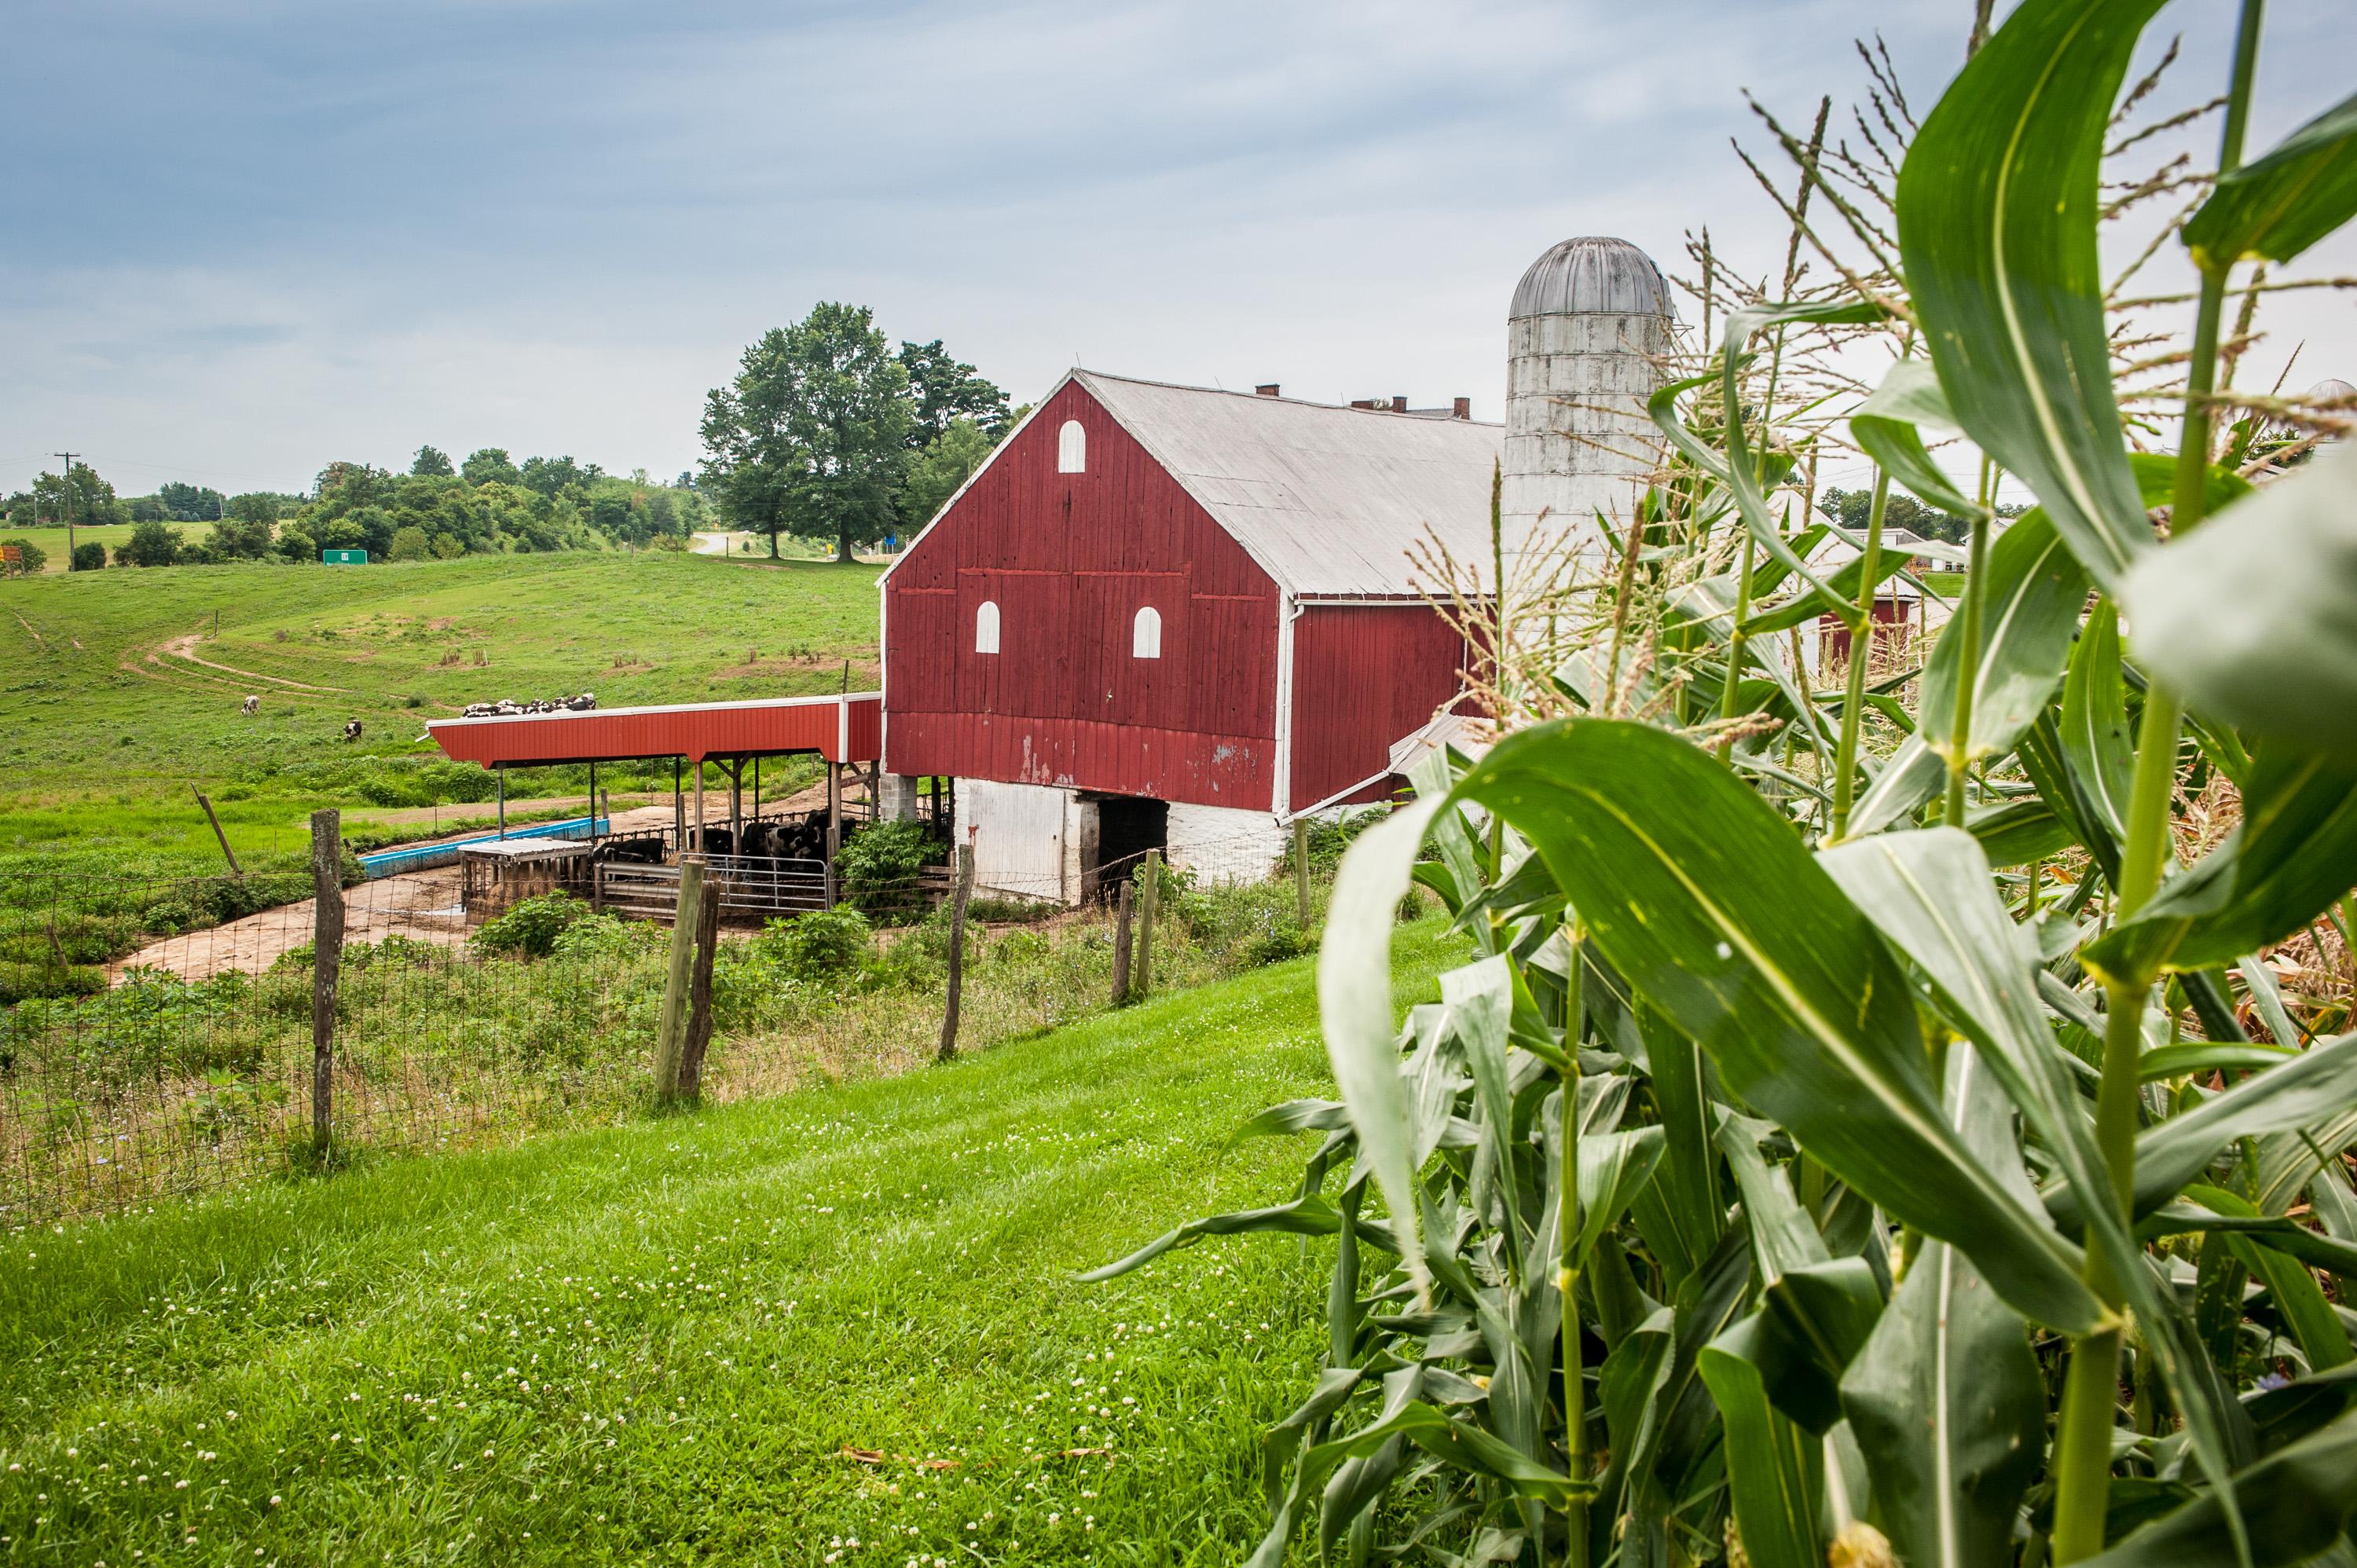 Red barn, corn field, and pasture. Photo by Edwin Remsberg